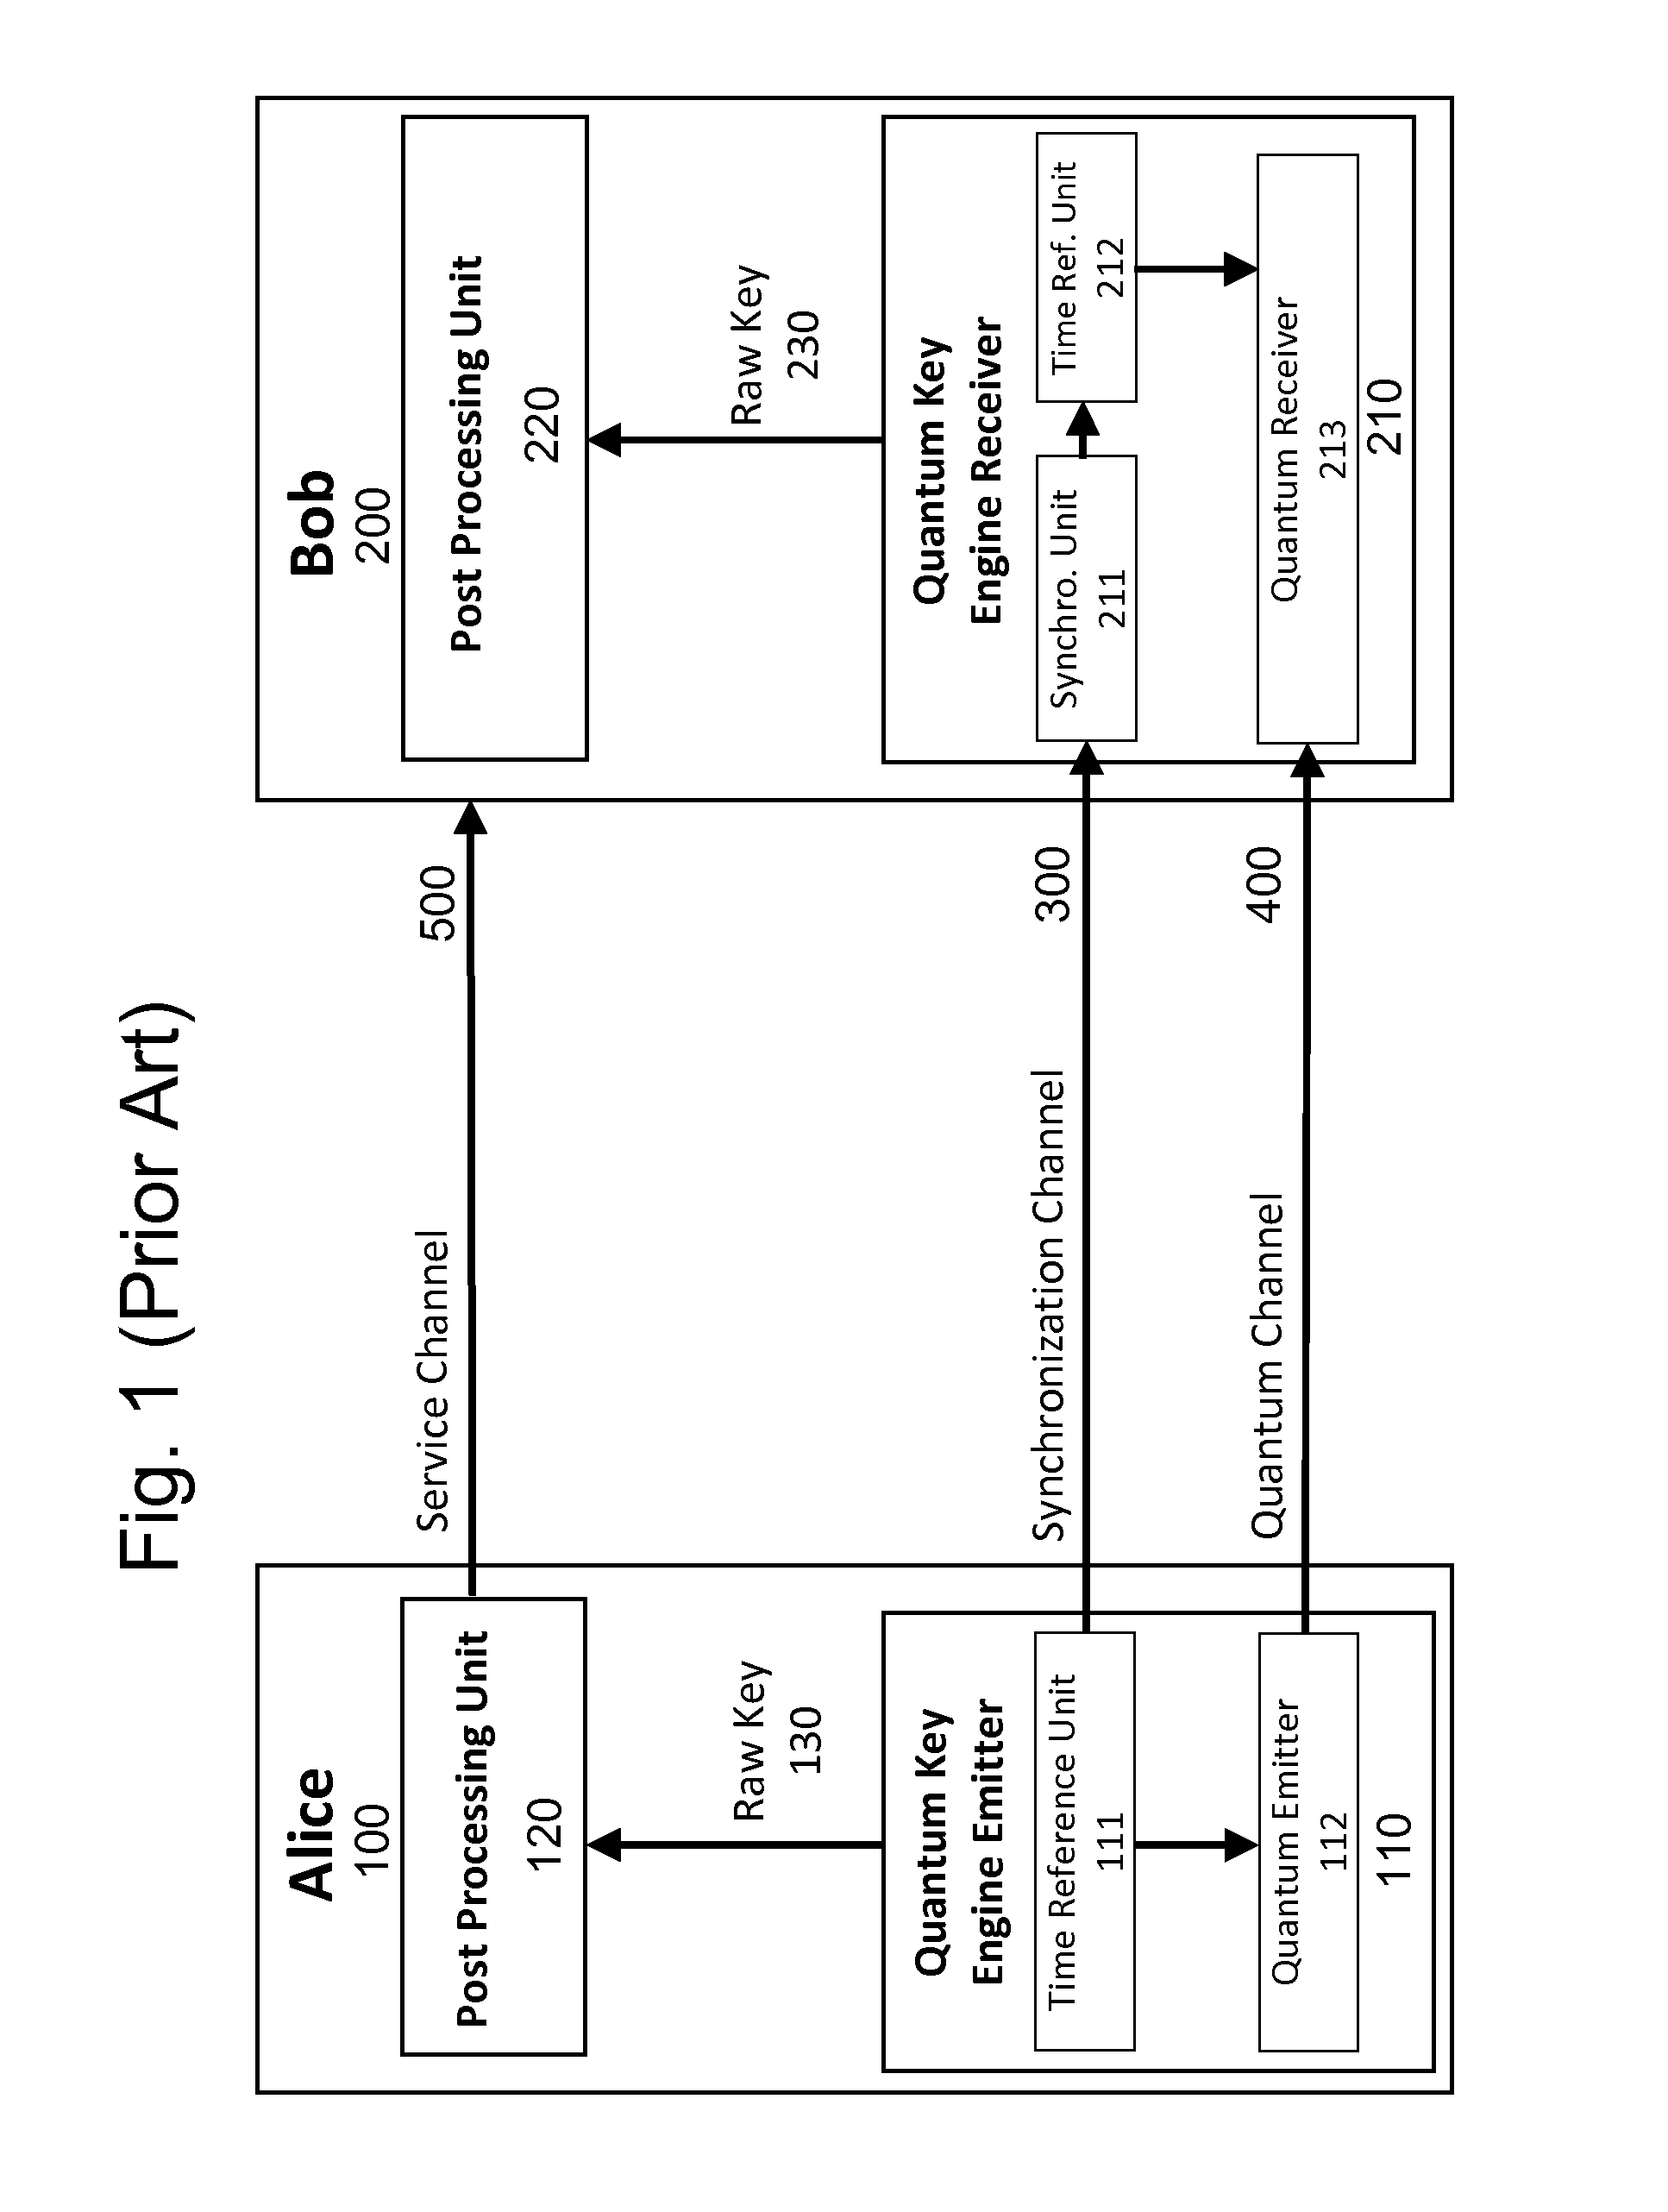 Apparatus and method for qkd quantum communication channel continuous synchronization and alignment